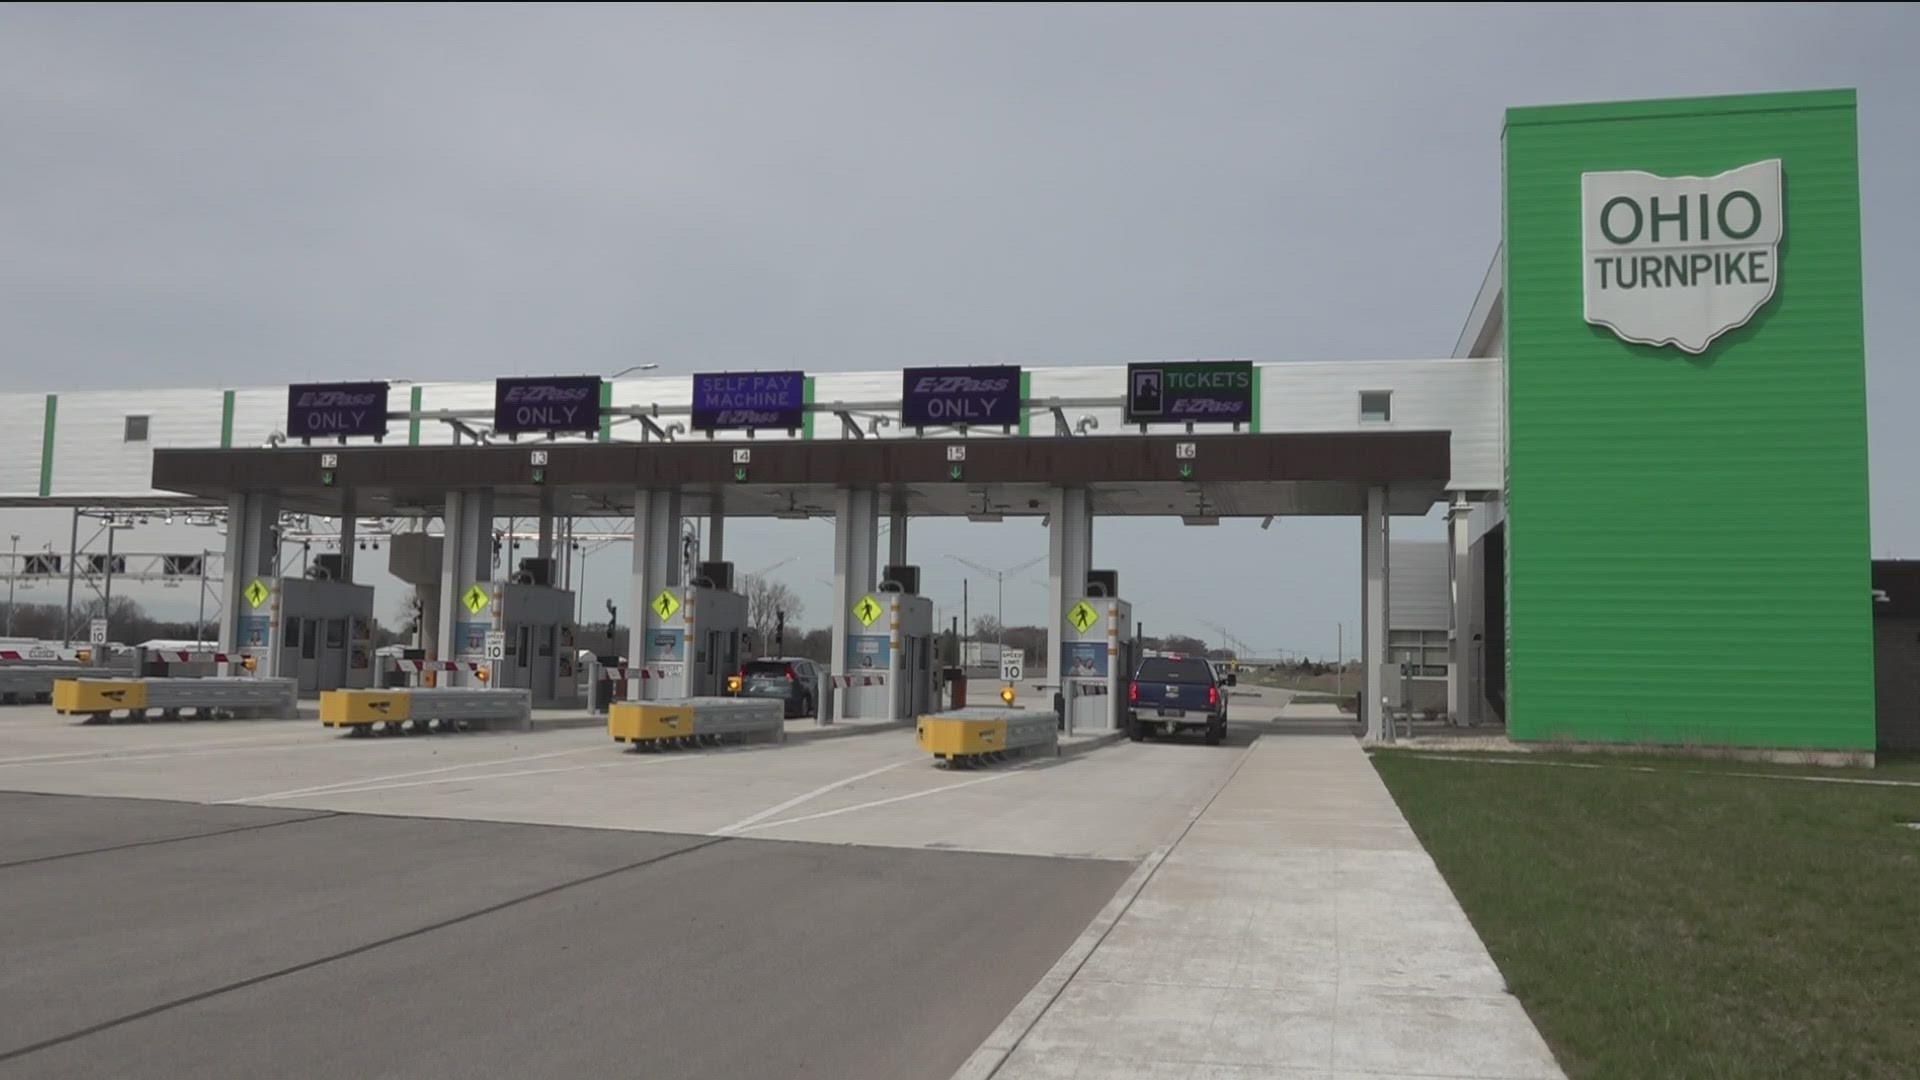 The Ohio Turnpike Commission officially launched its new toll booth collection system. The executive director says the changes will meet modern concerns.